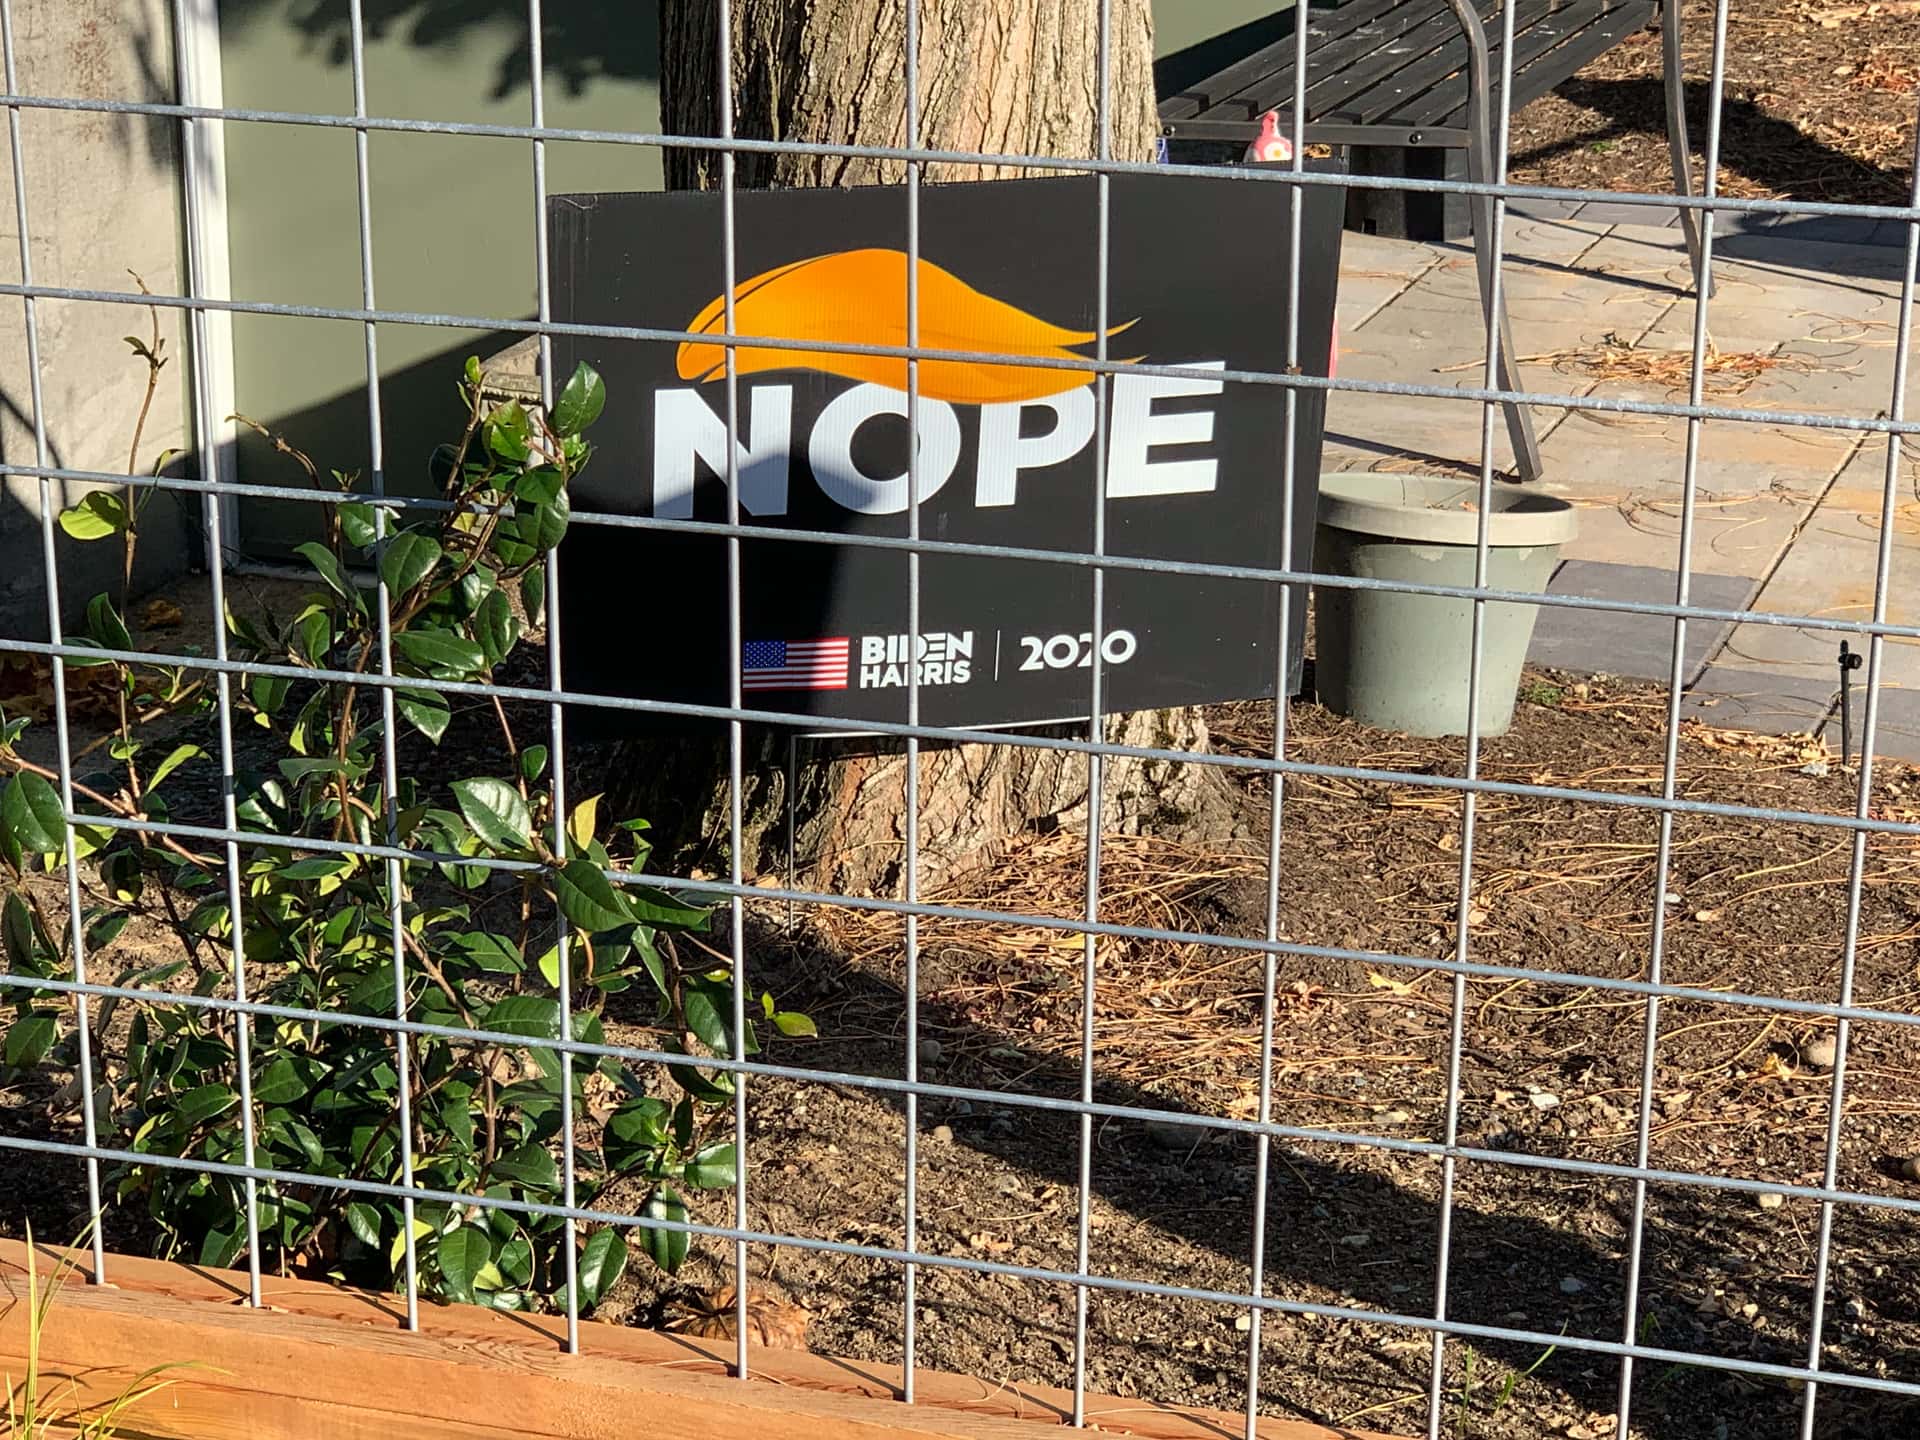 the word “NOPE” adorned with a caricature of Donald Trump’s hair on a yard sign